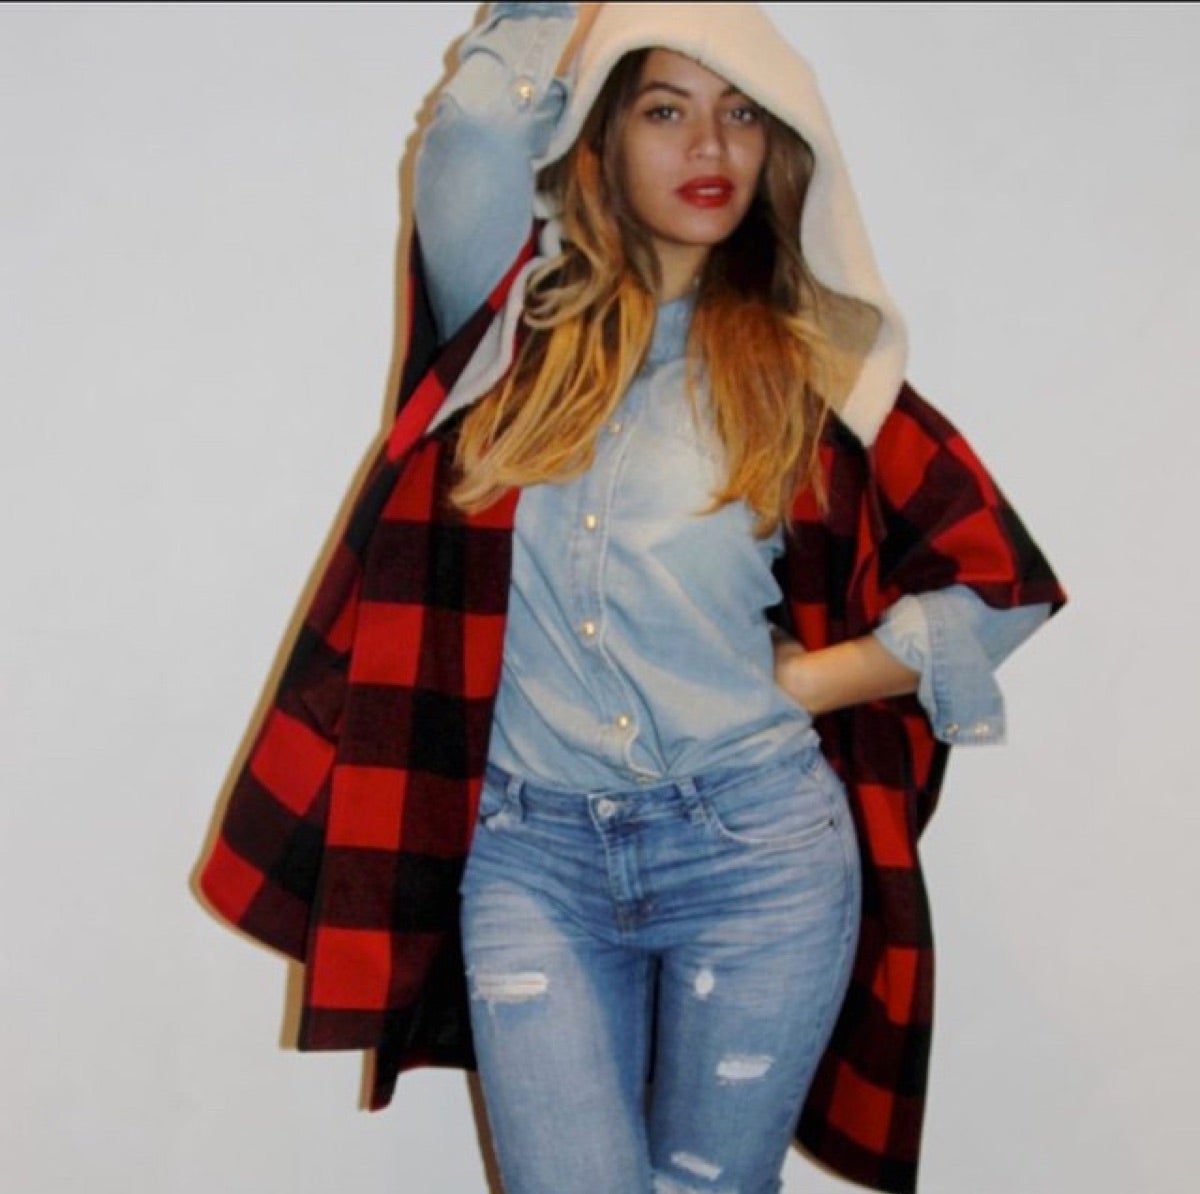 15 Times Beyonce Rocked a Killer Outfit by a Black Designer
